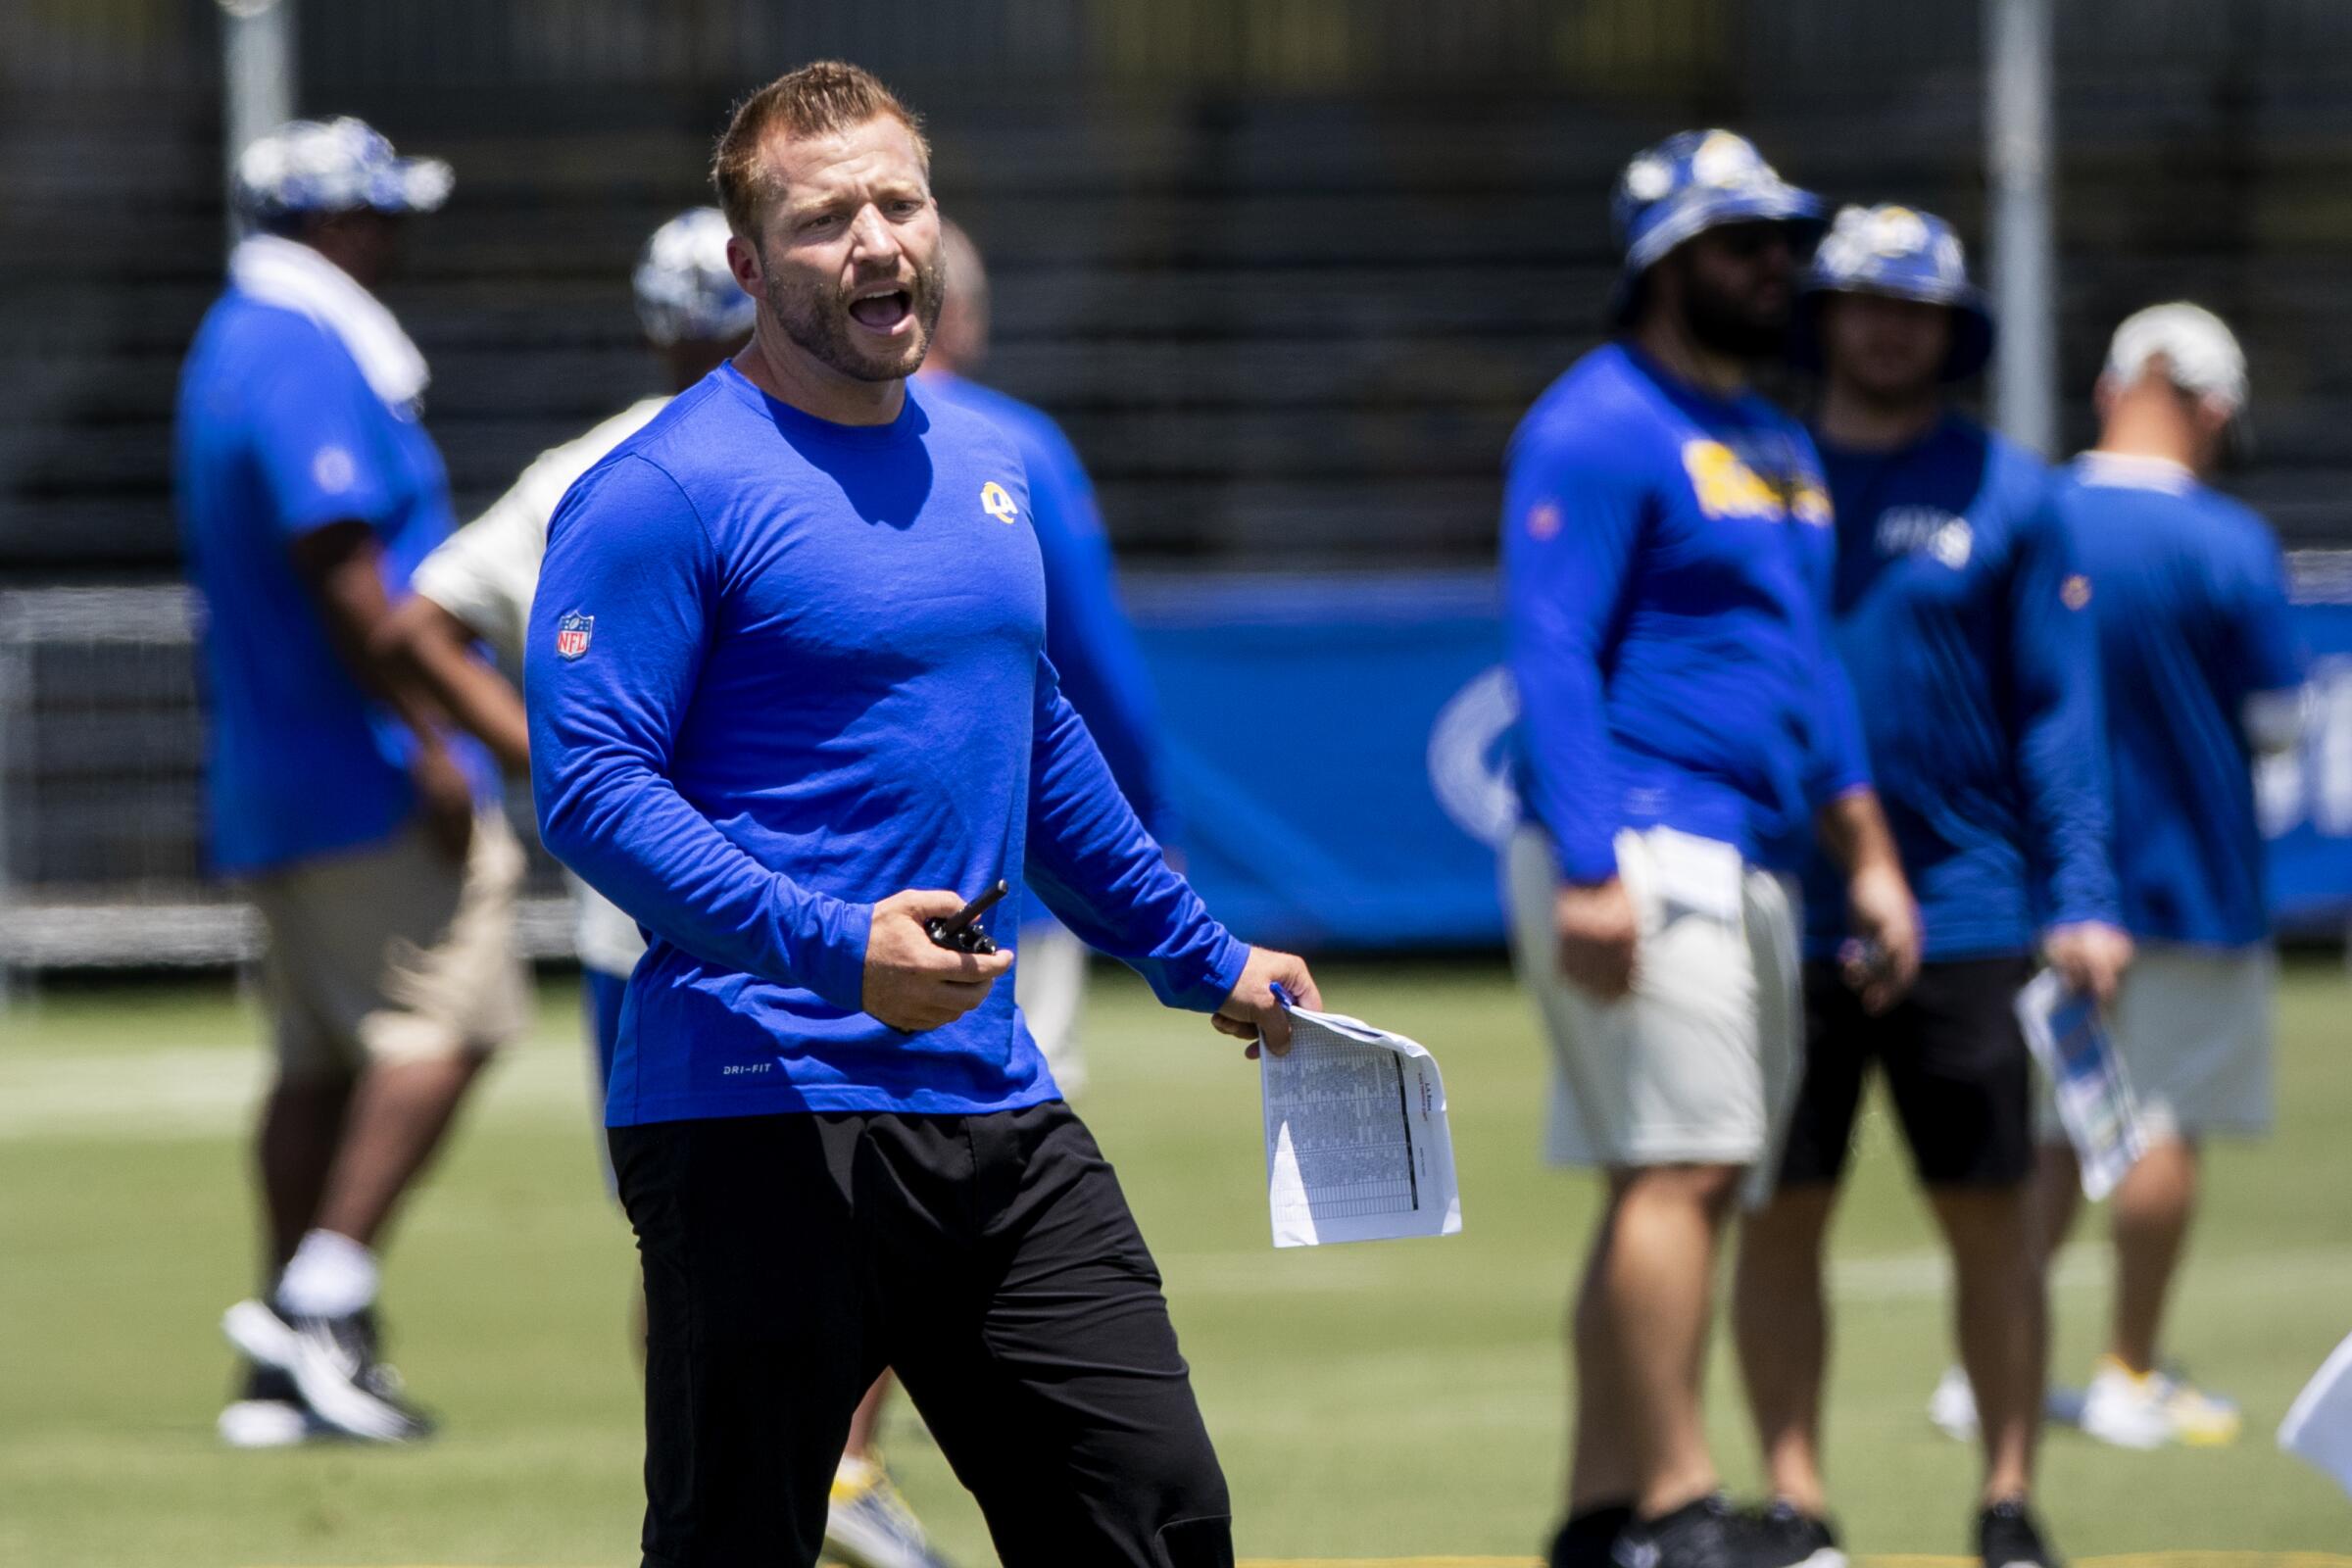 Rams coach Sean McVay calls out plays during training camp at UC Irvine.